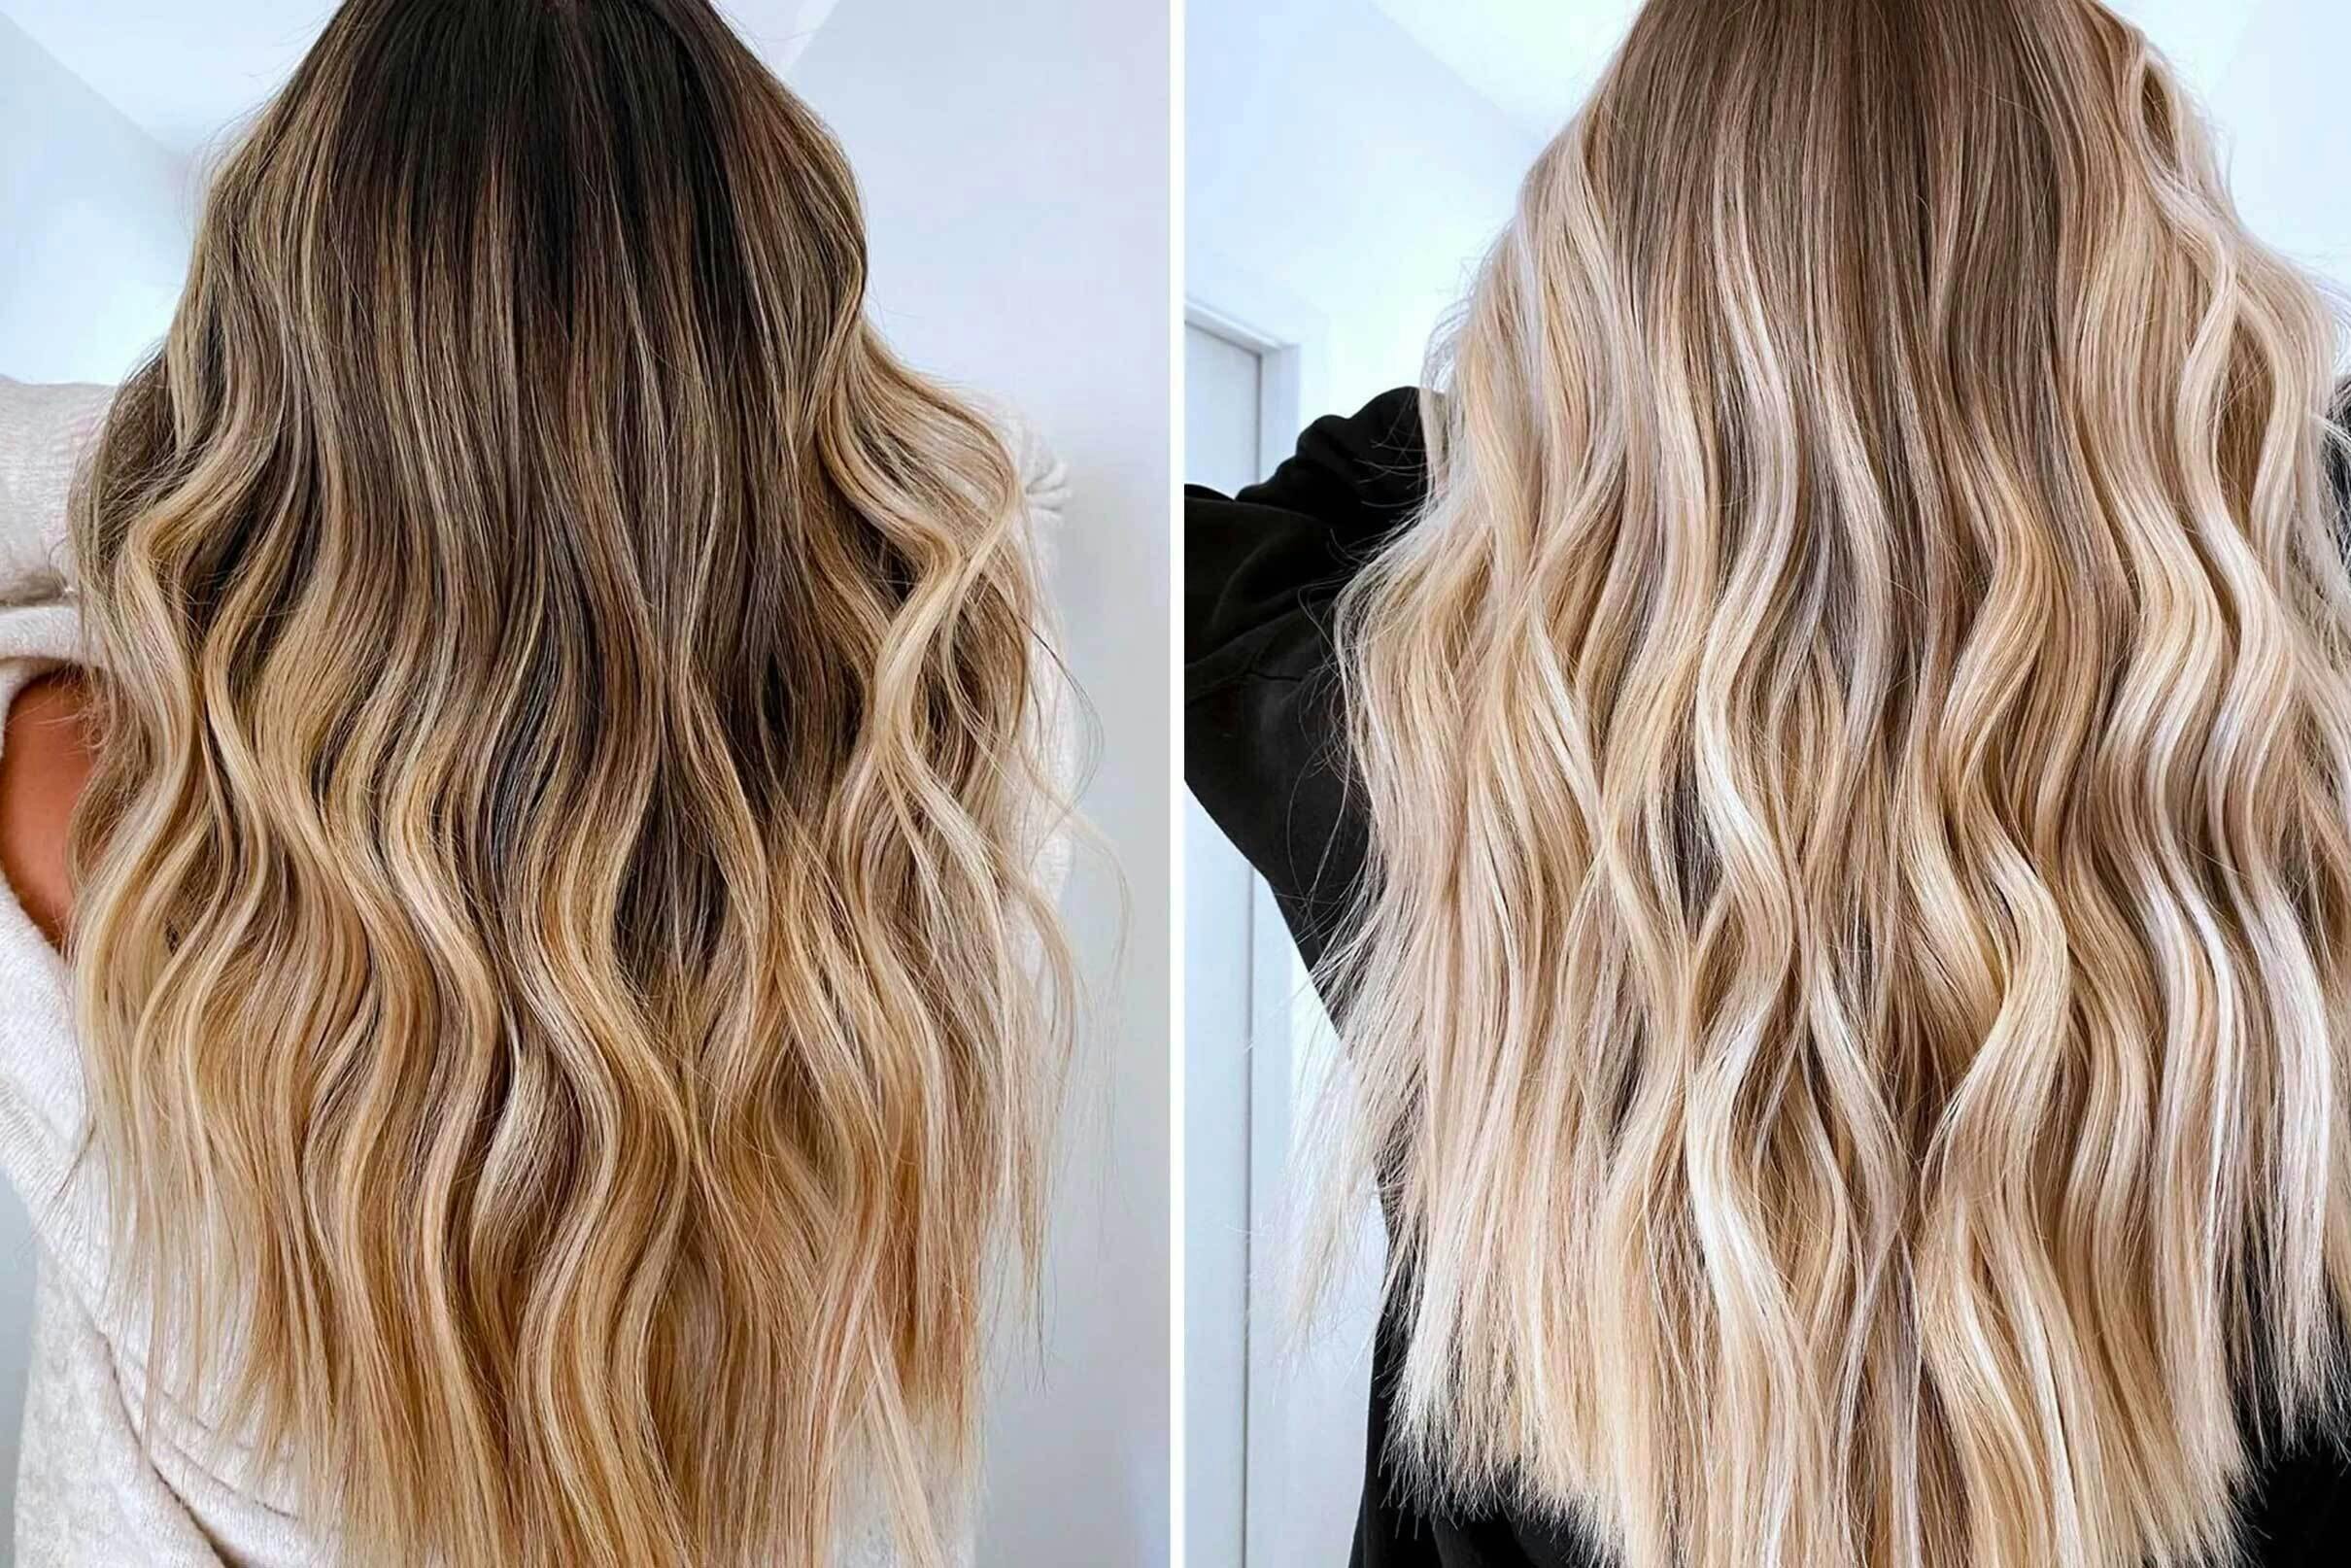 6. "Blonde Reverse Fire Hair: Before and After Transformations" - wide 1